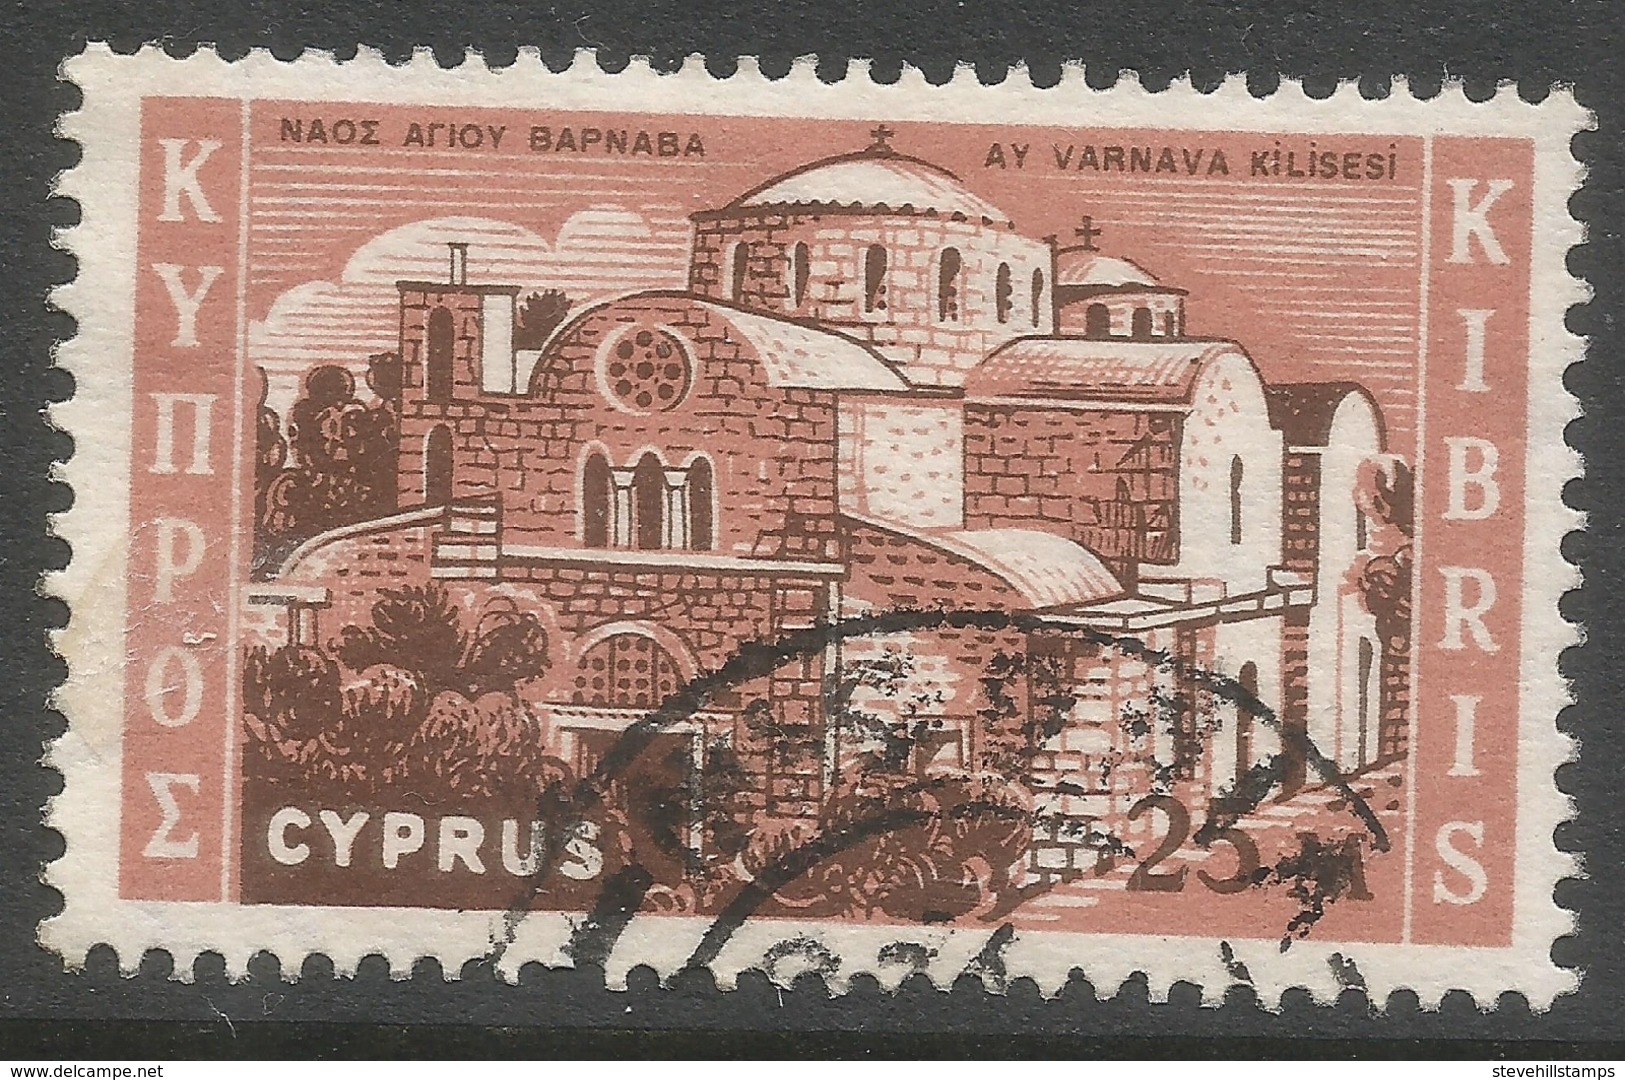 Cyprus. 1962 Definitives. 25m Used. SG 215 - Used Stamps